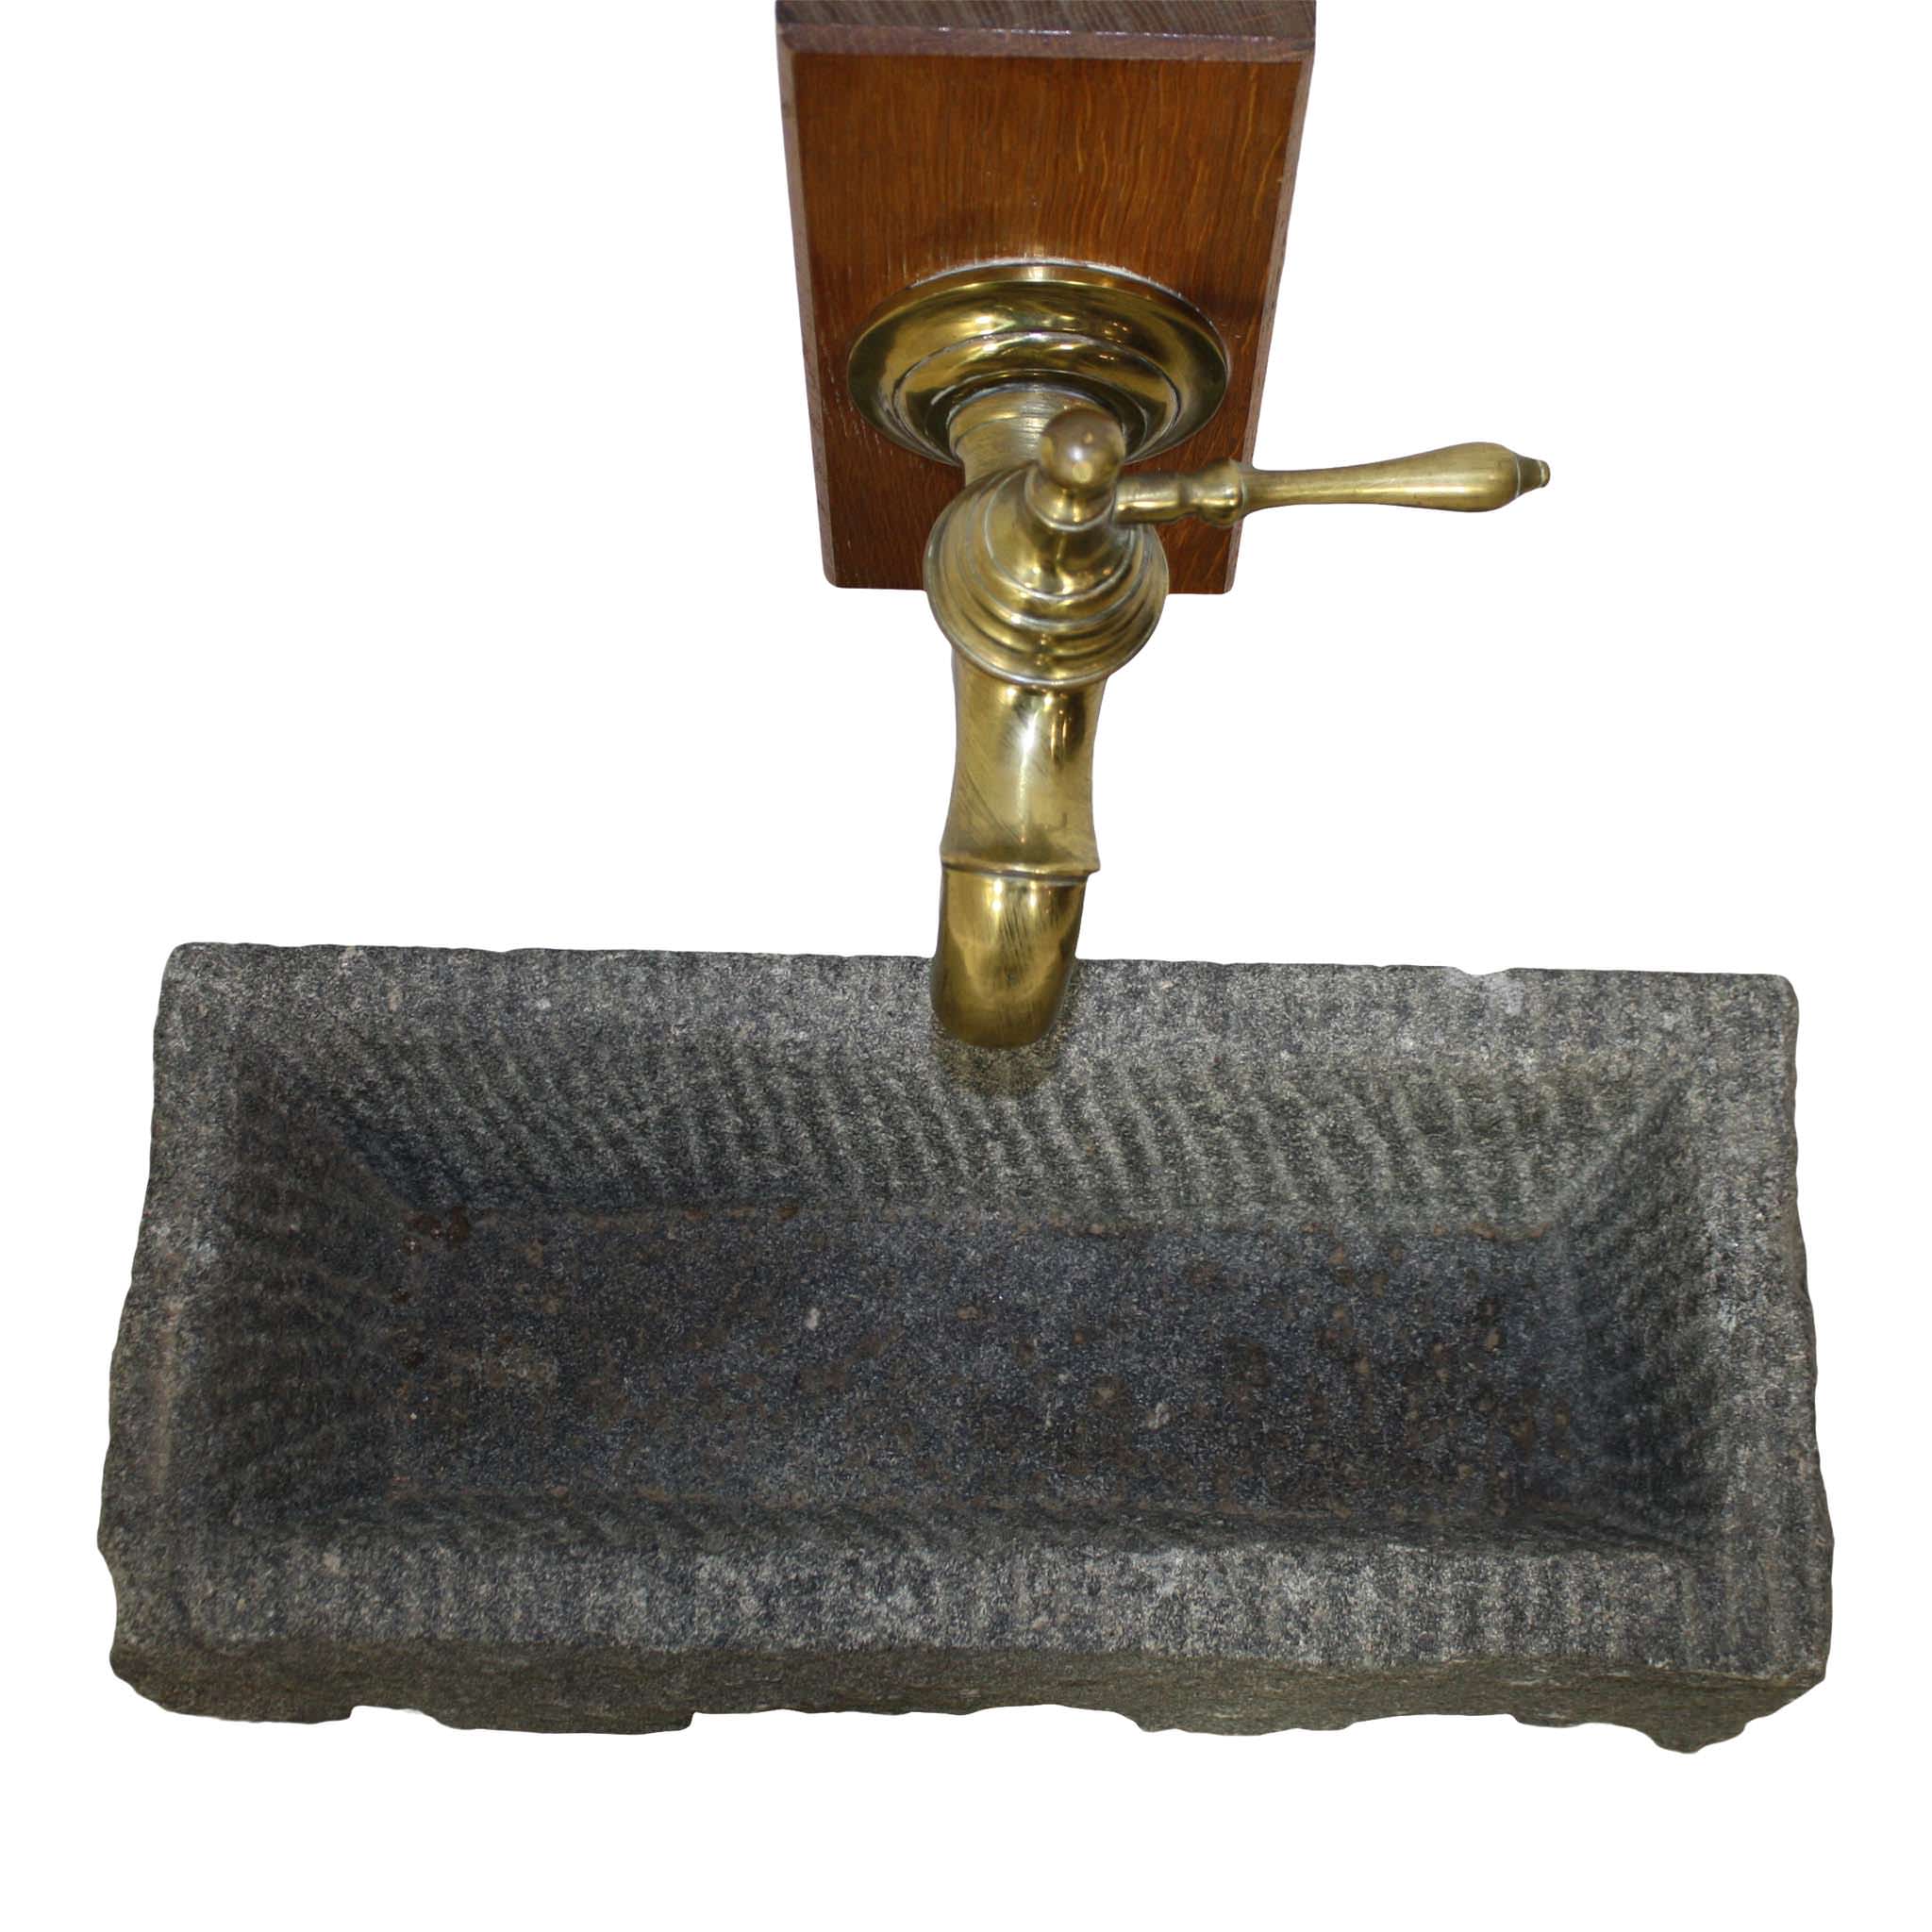 Faucet with Stone Basin